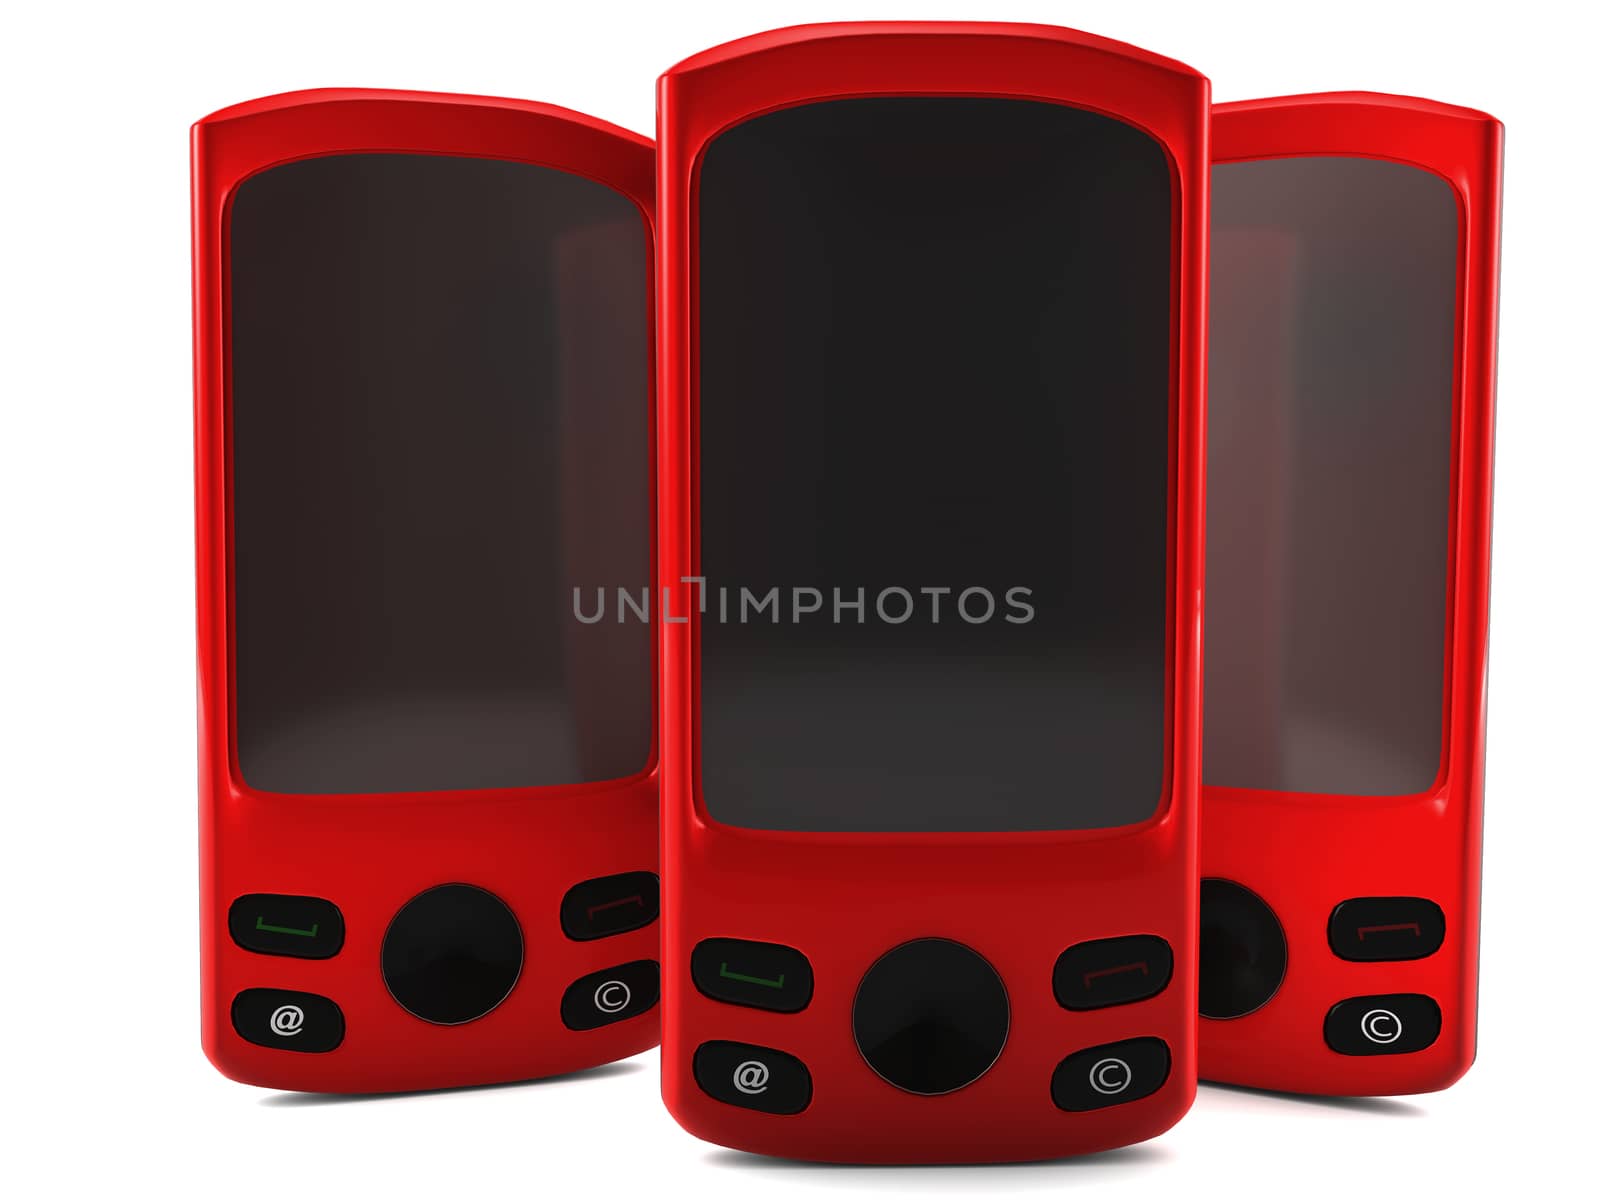 A 3D render of  red cell phones isolated on white